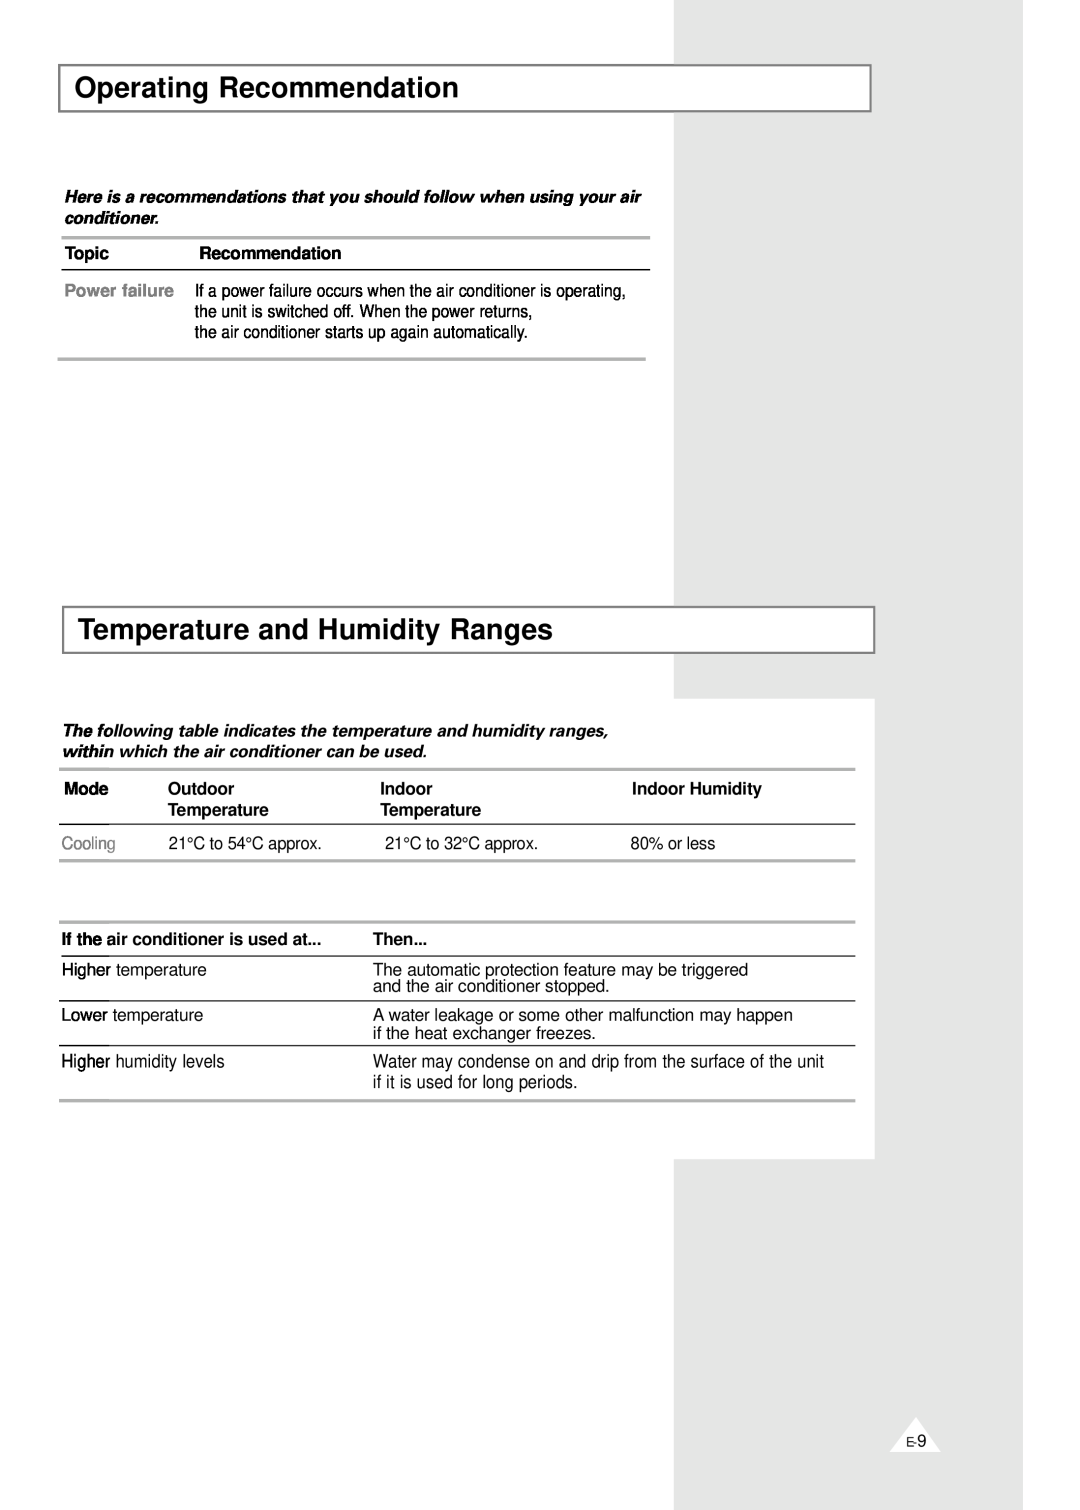 Samsung Operating Recommendation, Temperature and Humidity Ranges, Higher humidity levels, if it is used for long periods 